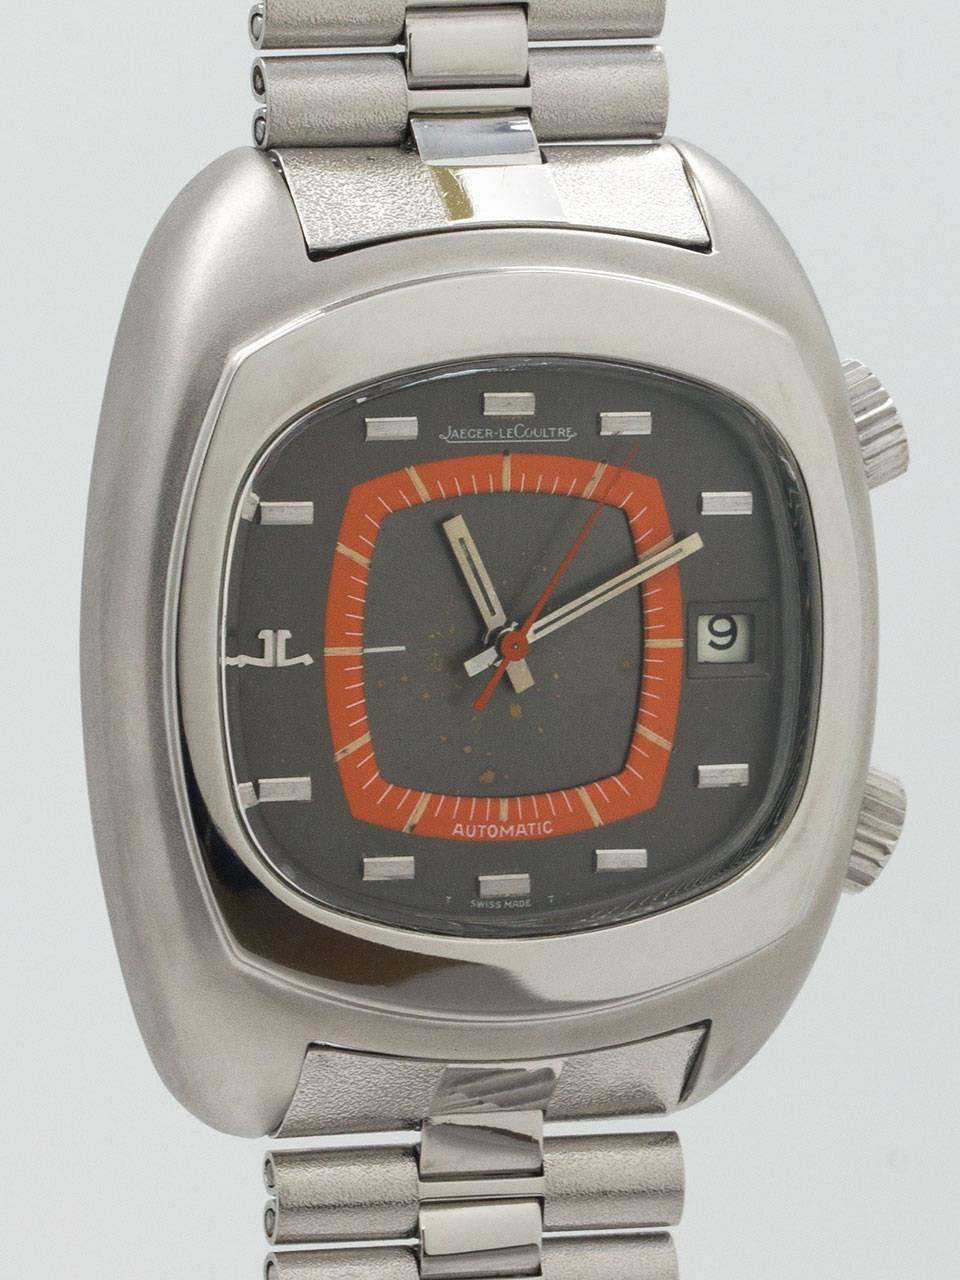 Jaeger LeCoultre Alarm Wristwatch ref E871 circa 1970s.  38 x 45mm “TV screen” shaped alarm model. Beautiful original orange and charcoal dial with applied silver indexes and silver baton hands. Powered by self winding calibre 916 movement with